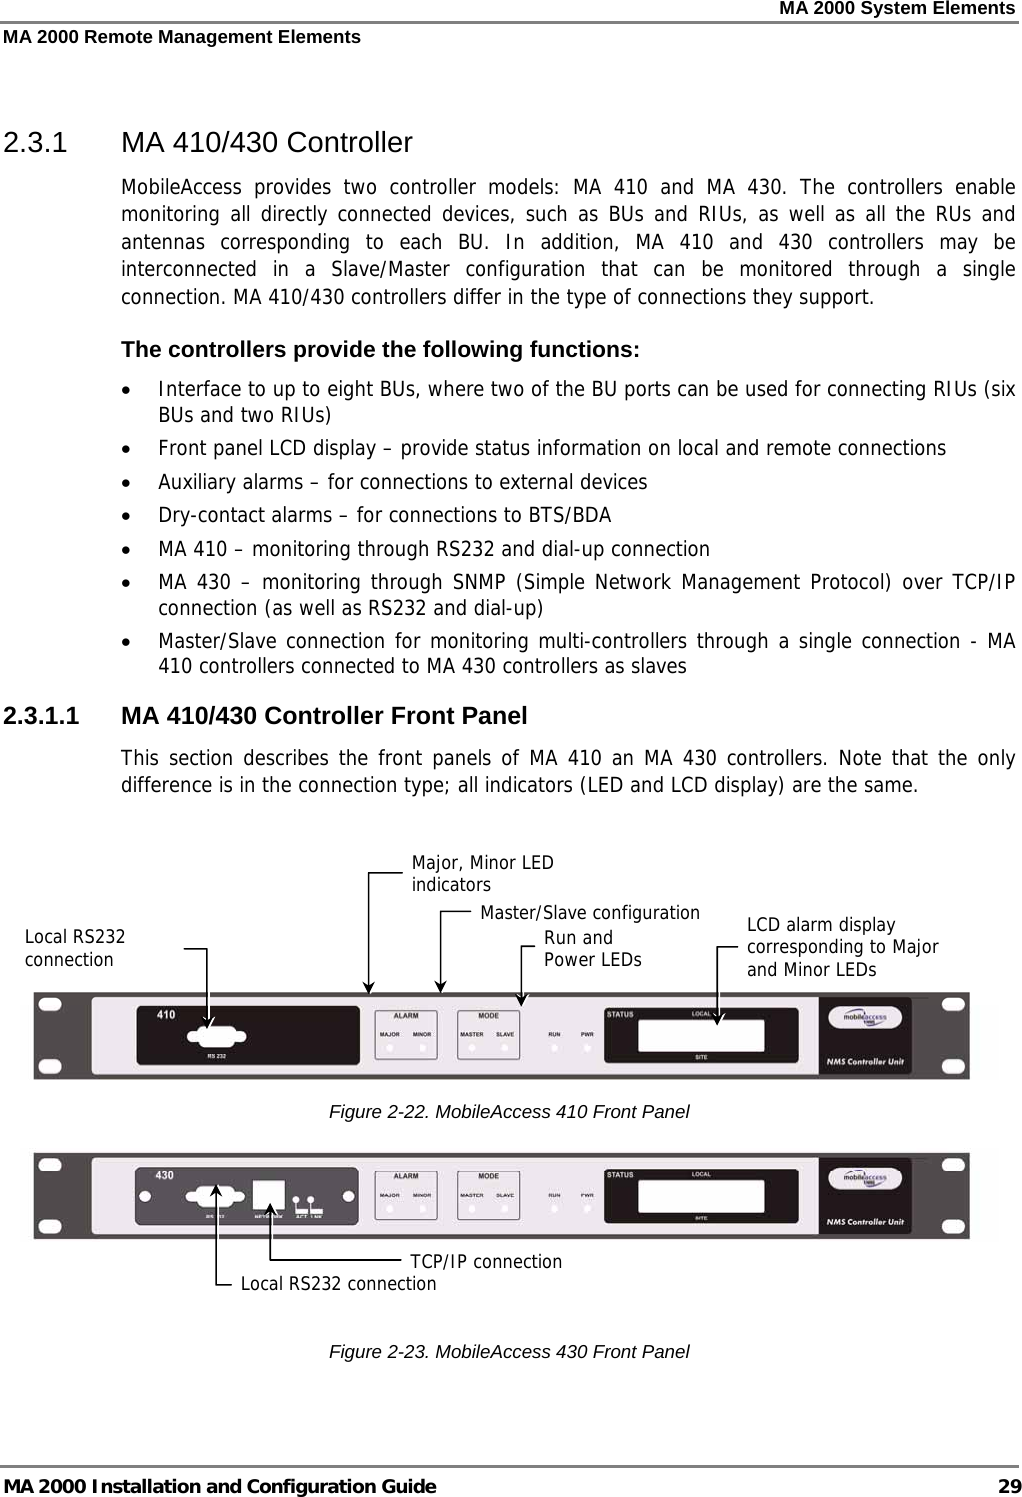 MA 2000 System Elements MA 2000 Remote Management Elements MA 2000 Installation and Configuration Guide  29  2.3.1  MA 410/430 Controller MobileAccess provides two controller models: MA 410 and MA 430. The controllers enable monitoring all directly connected devices, such as BUs and RIUs, as well as all the RUs and antennas corresponding to each BU. In addition, MA 410 and 430 controllers may be interconnected in a Slave/Master configuration that can be monitored through a single connection. MA 410/430 controllers differ in the type of connections they support. The controllers provide the following functions: • Interface to up to eight BUs, where two of the BU ports can be used for connecting RIUs (six BUs and two RIUs) • Front panel LCD display – provide status information on local and remote connections  • Auxiliary alarms – for connections to external devices • Dry-contact alarms – for connections to BTS/BDA • MA 410 – monitoring through RS232 and dial-up connection • MA 430 – monitoring through SNMP (Simple Network Management Protocol) over TCP/IP connection (as well as RS232 and dial-up) • Master/Slave connection for monitoring multi-controllers through a single connection - MA 410 controllers connected to MA 430 controllers as slaves  2.3.1.1  MA 410/430 Controller Front Panel This section describes the front panels of MA 410 an MA 430 controllers. Note that the only difference is in the connection type; all indicators (LED and LCD display) are the same.      Figure  2-22. MobileAccess 410 Front Panel    Figure  2-23. MobileAccess 430 Front Panel  Local RS232 connection  LCD alarm display corresponding to Major and Minor LEDs  Major, Minor LED indicators Master/Slave configurationRun and  Power LEDs TCP/IP connectionLocal RS232 connection 